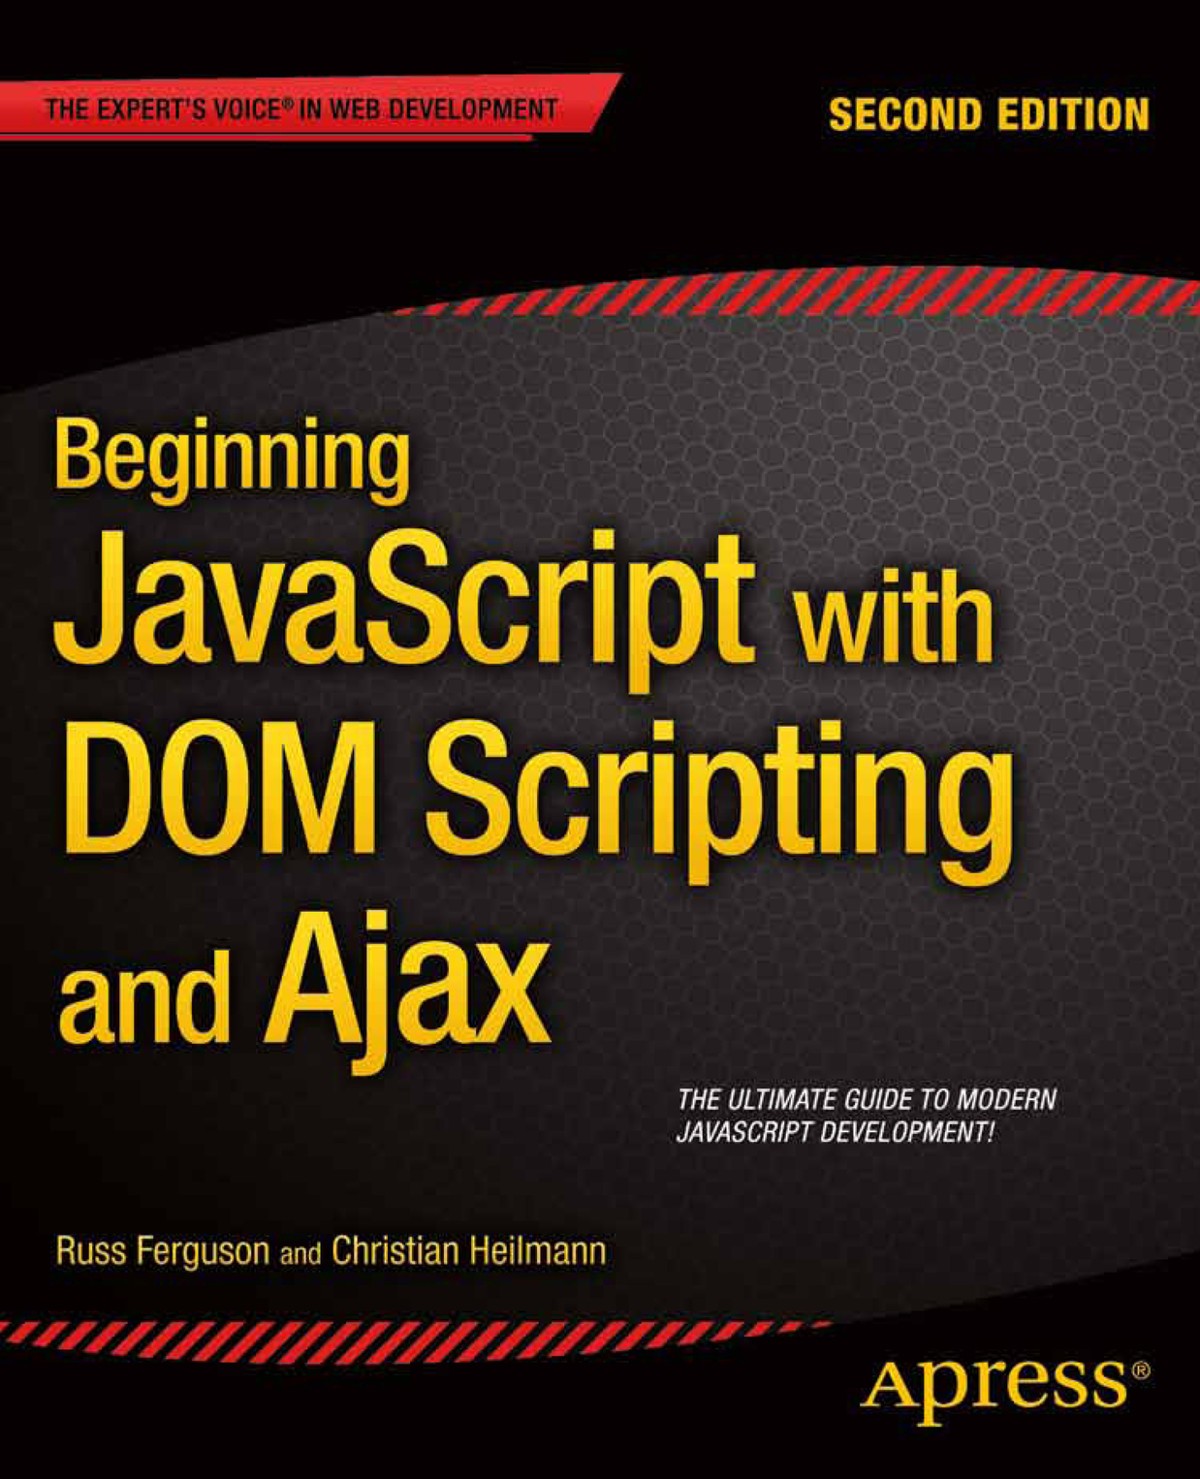 Beginning JavaScript With DOM Scripting and Ajax: Second Editon